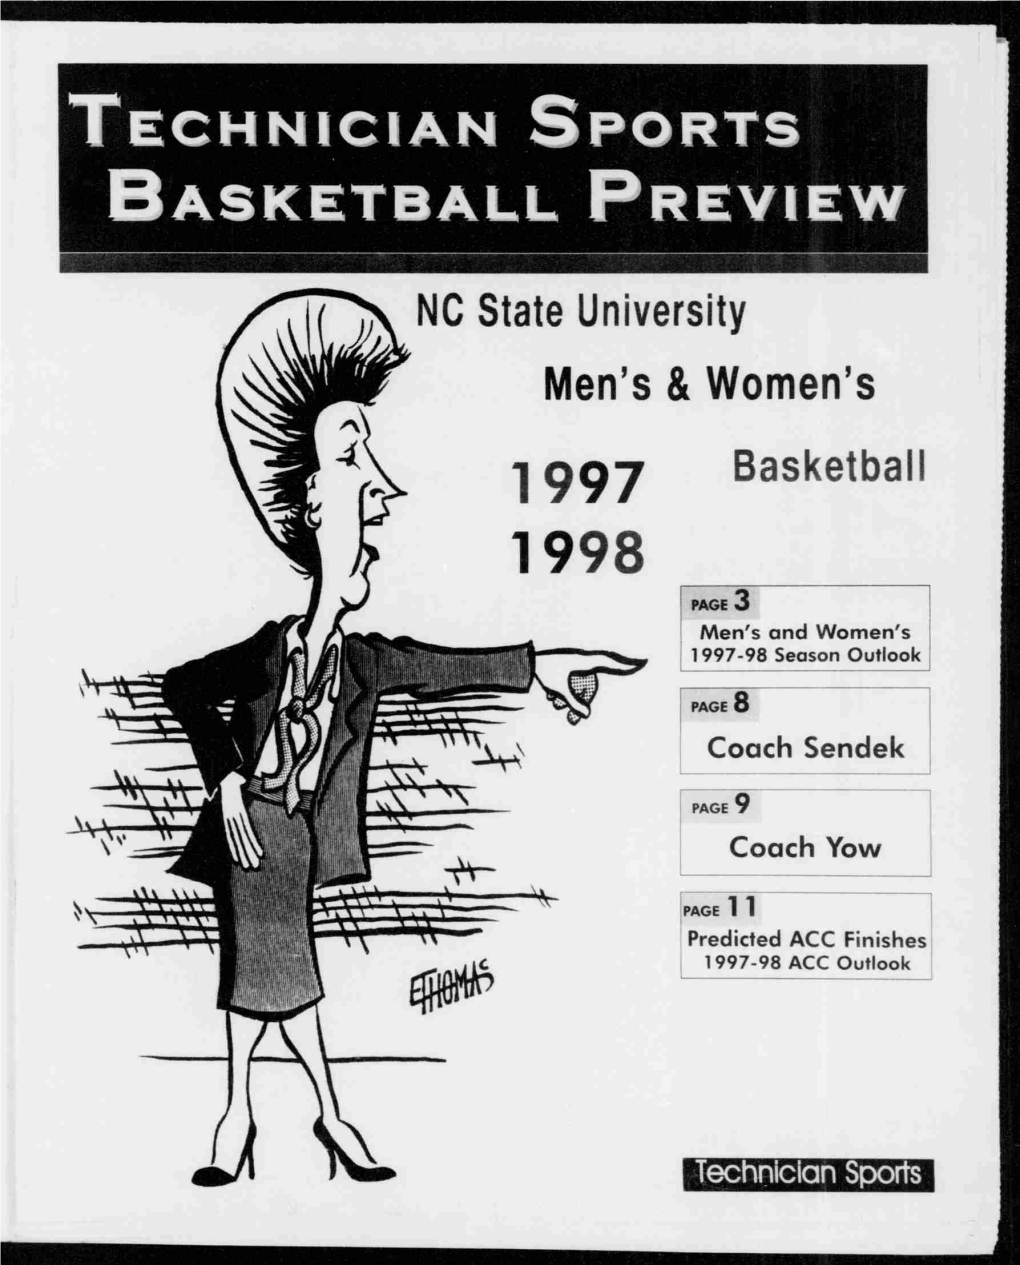 TECHNICIAN SPORTS BASKETBALL PREVIEW NC State University Men's & Women's 1997 Basketball 1998 3 PAGE — Men's And